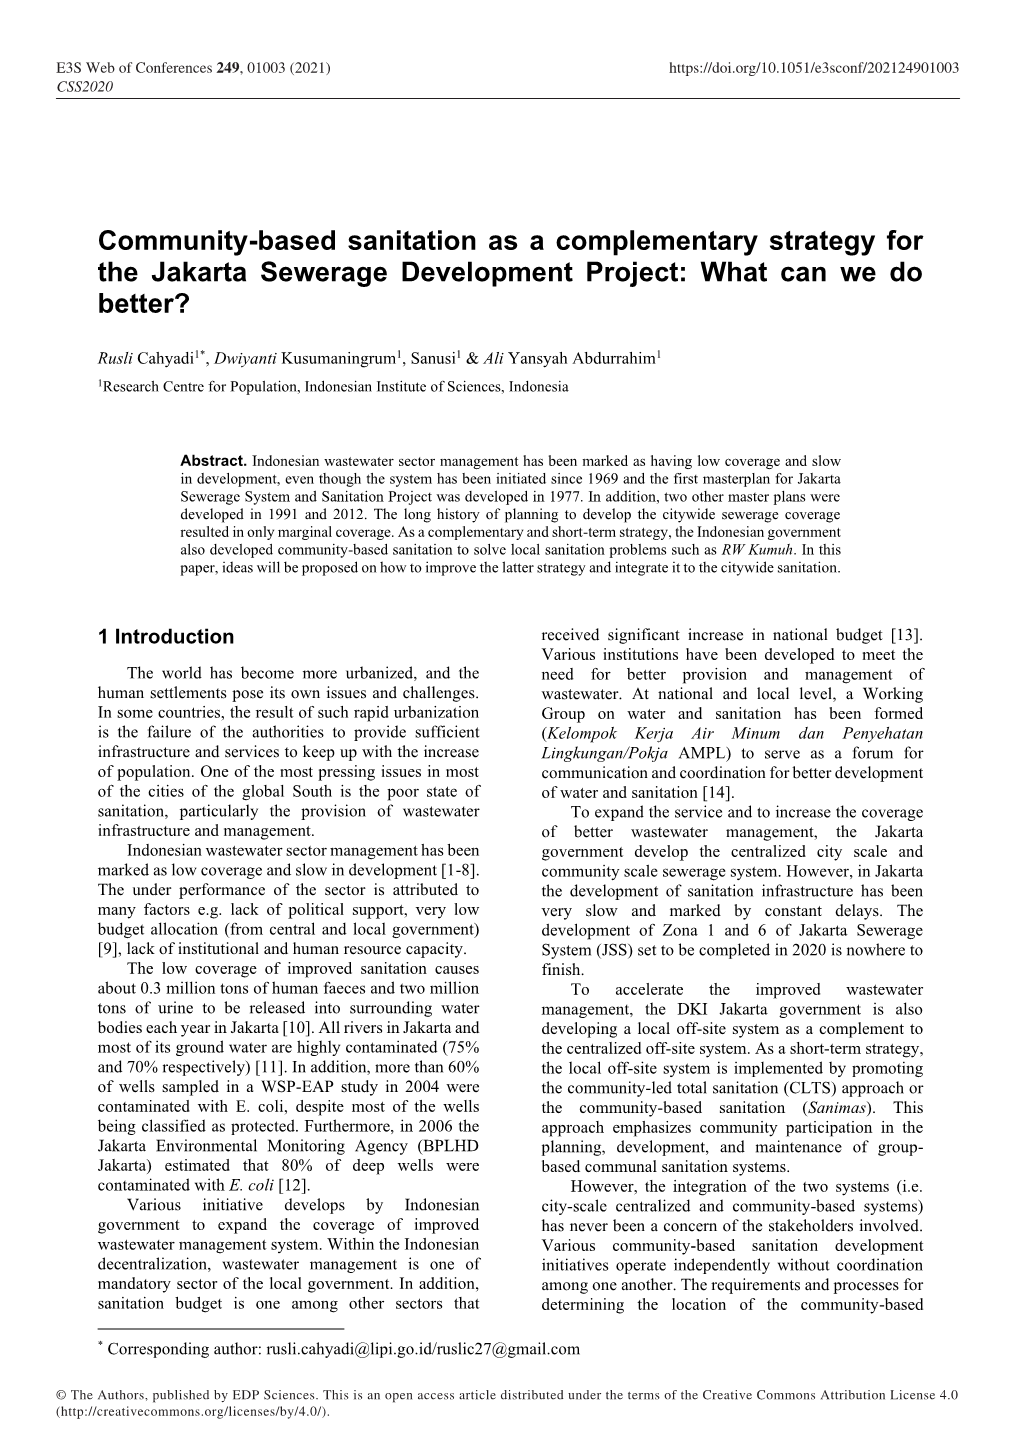 Community-Based Sanitation As a Complementary Strategy for the Jakarta Sewerage Development Project: What Can We Do Better?